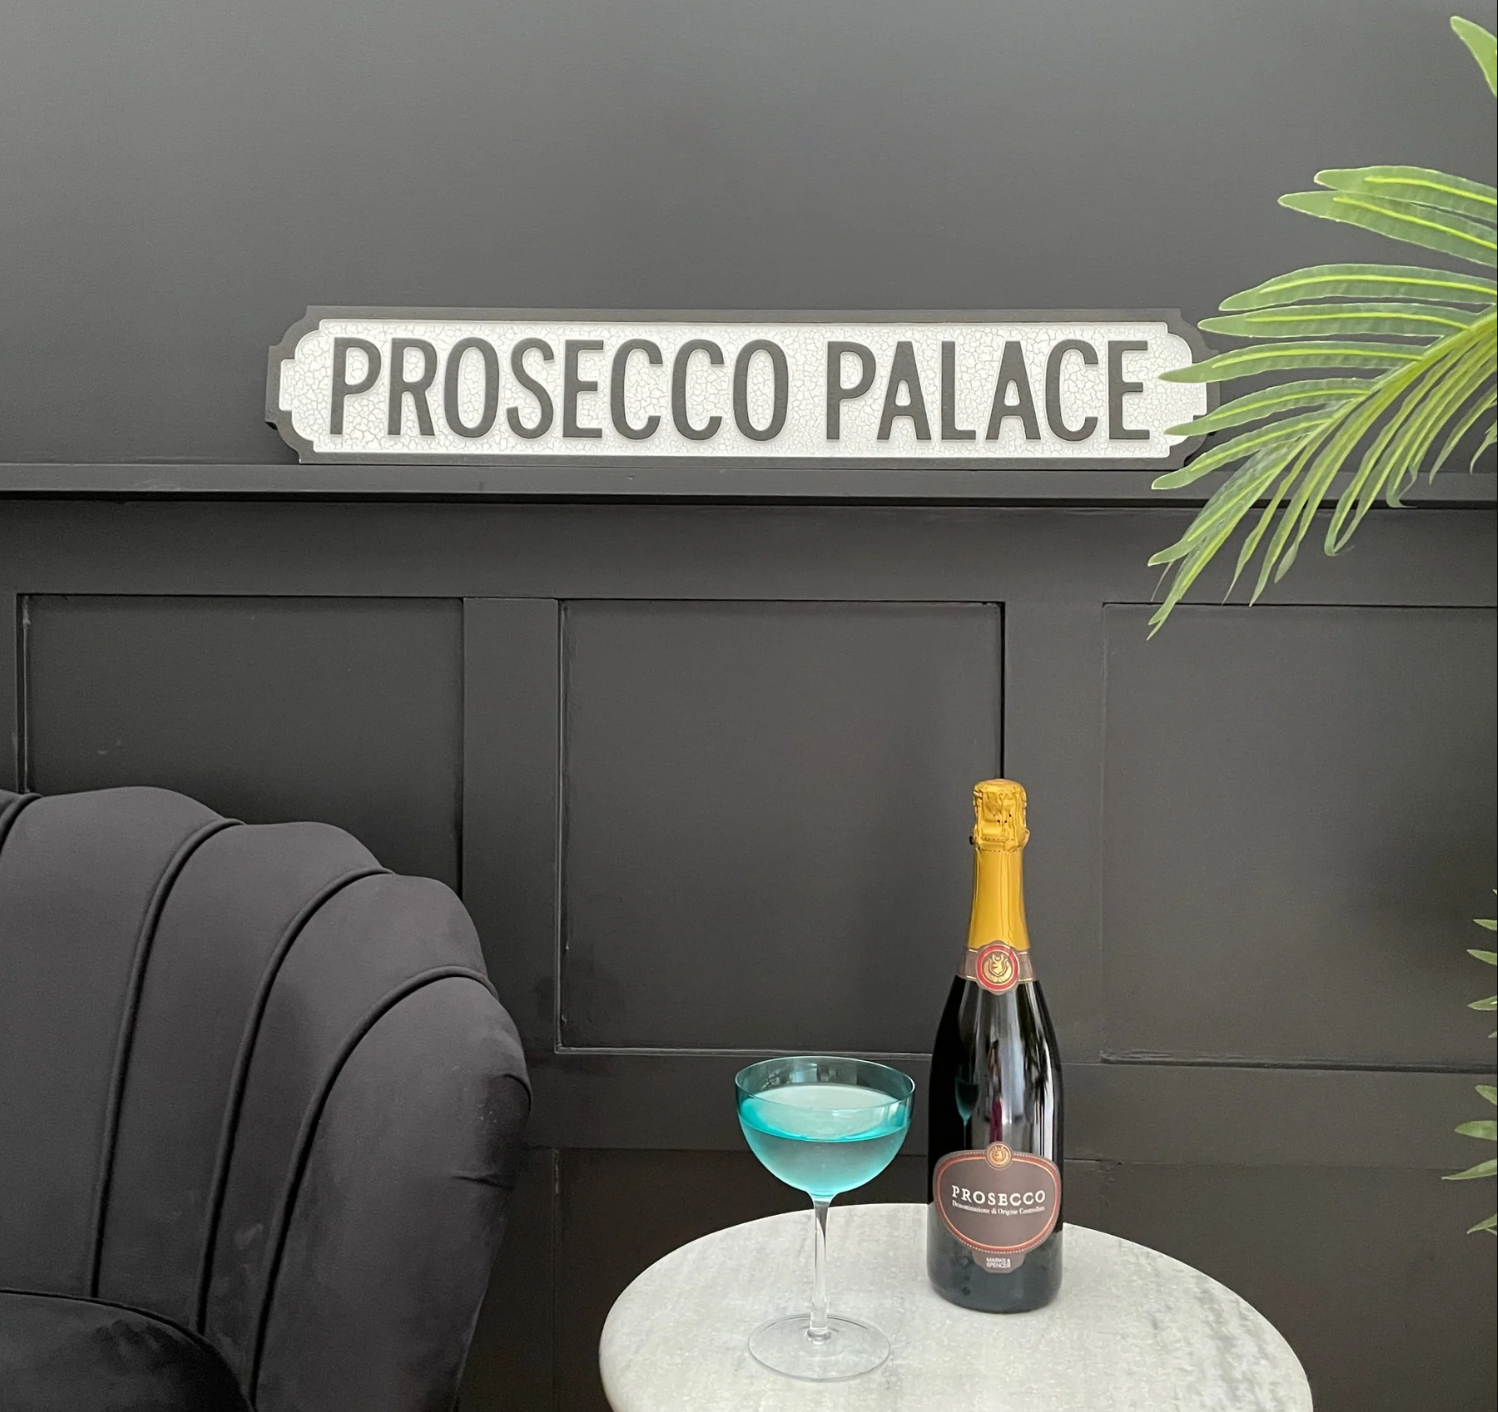 "Prosecco Palace" Sign